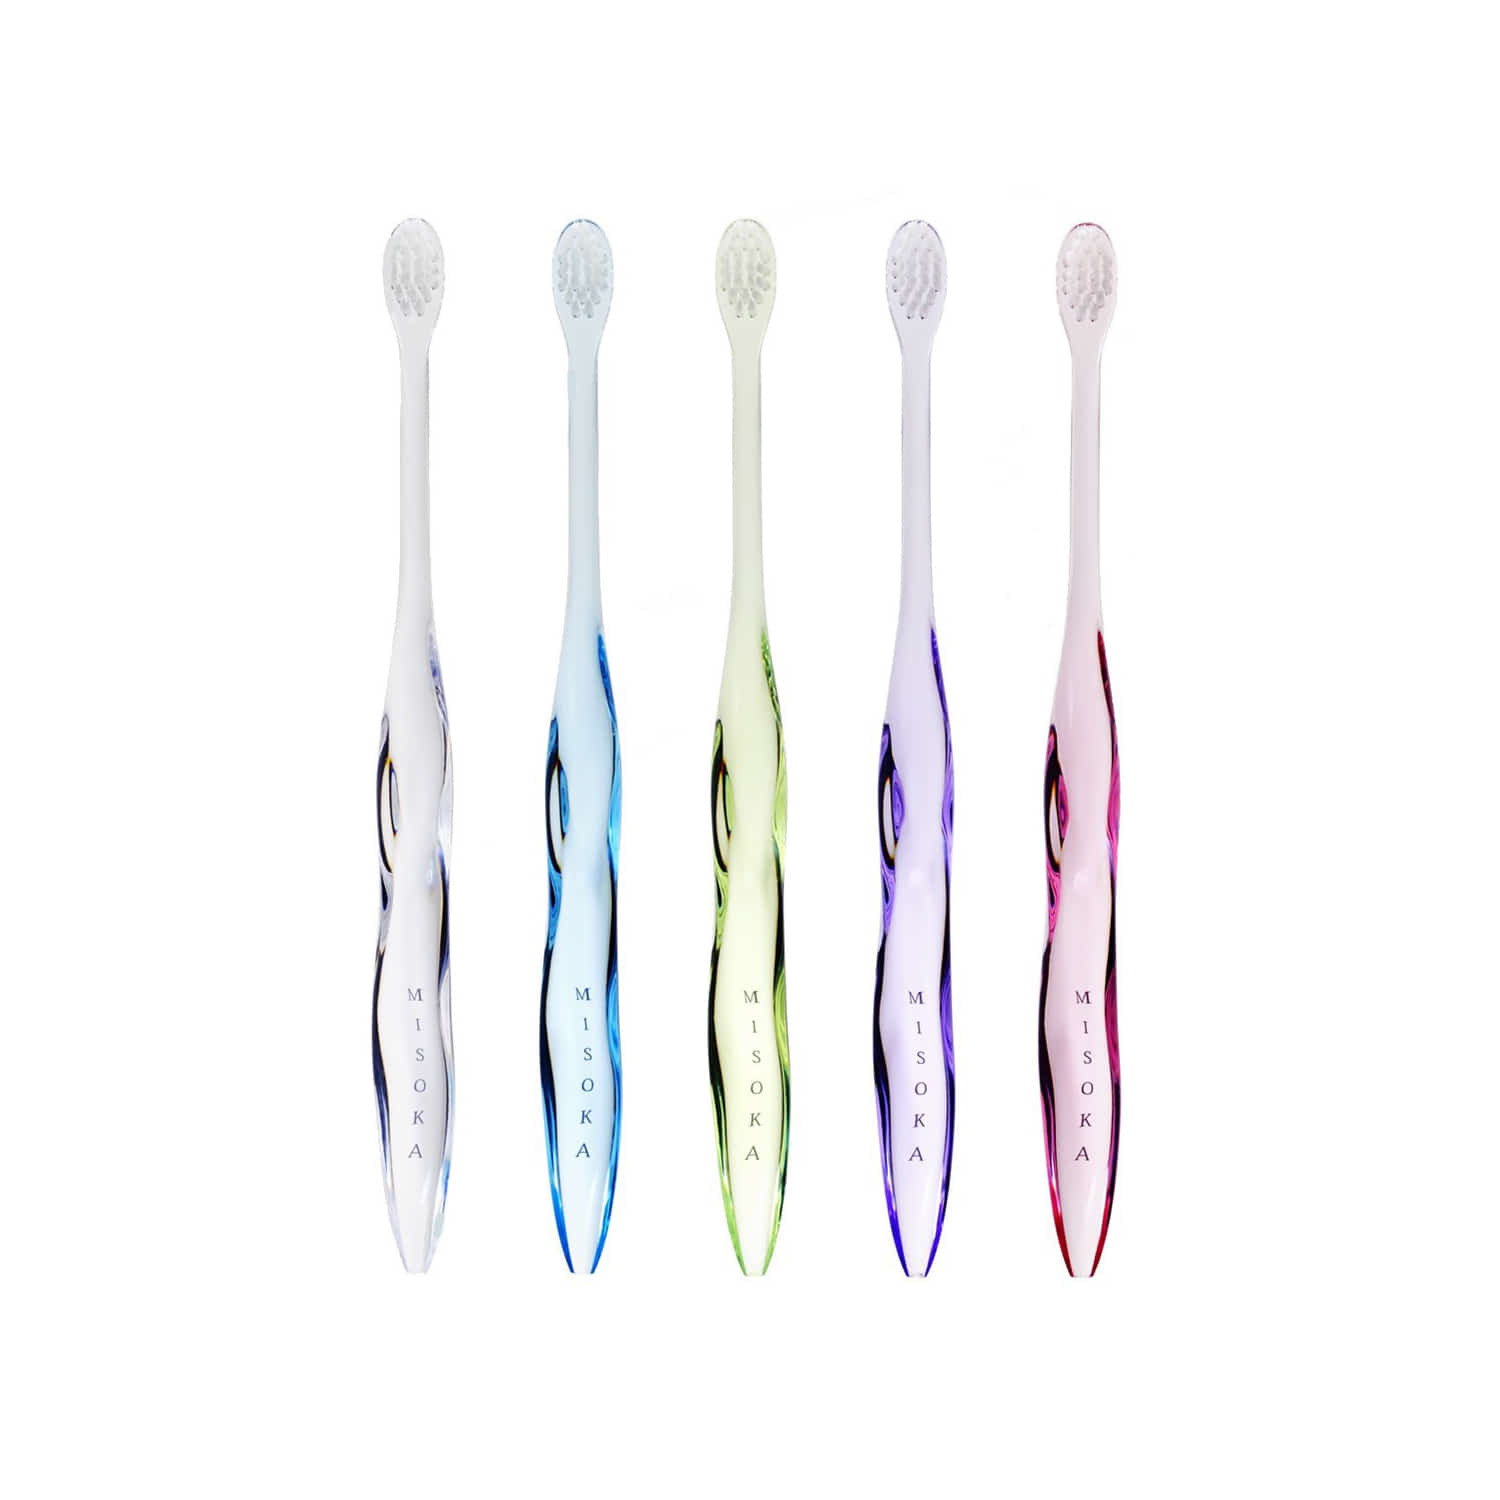 Ism toothbrush, 5colors